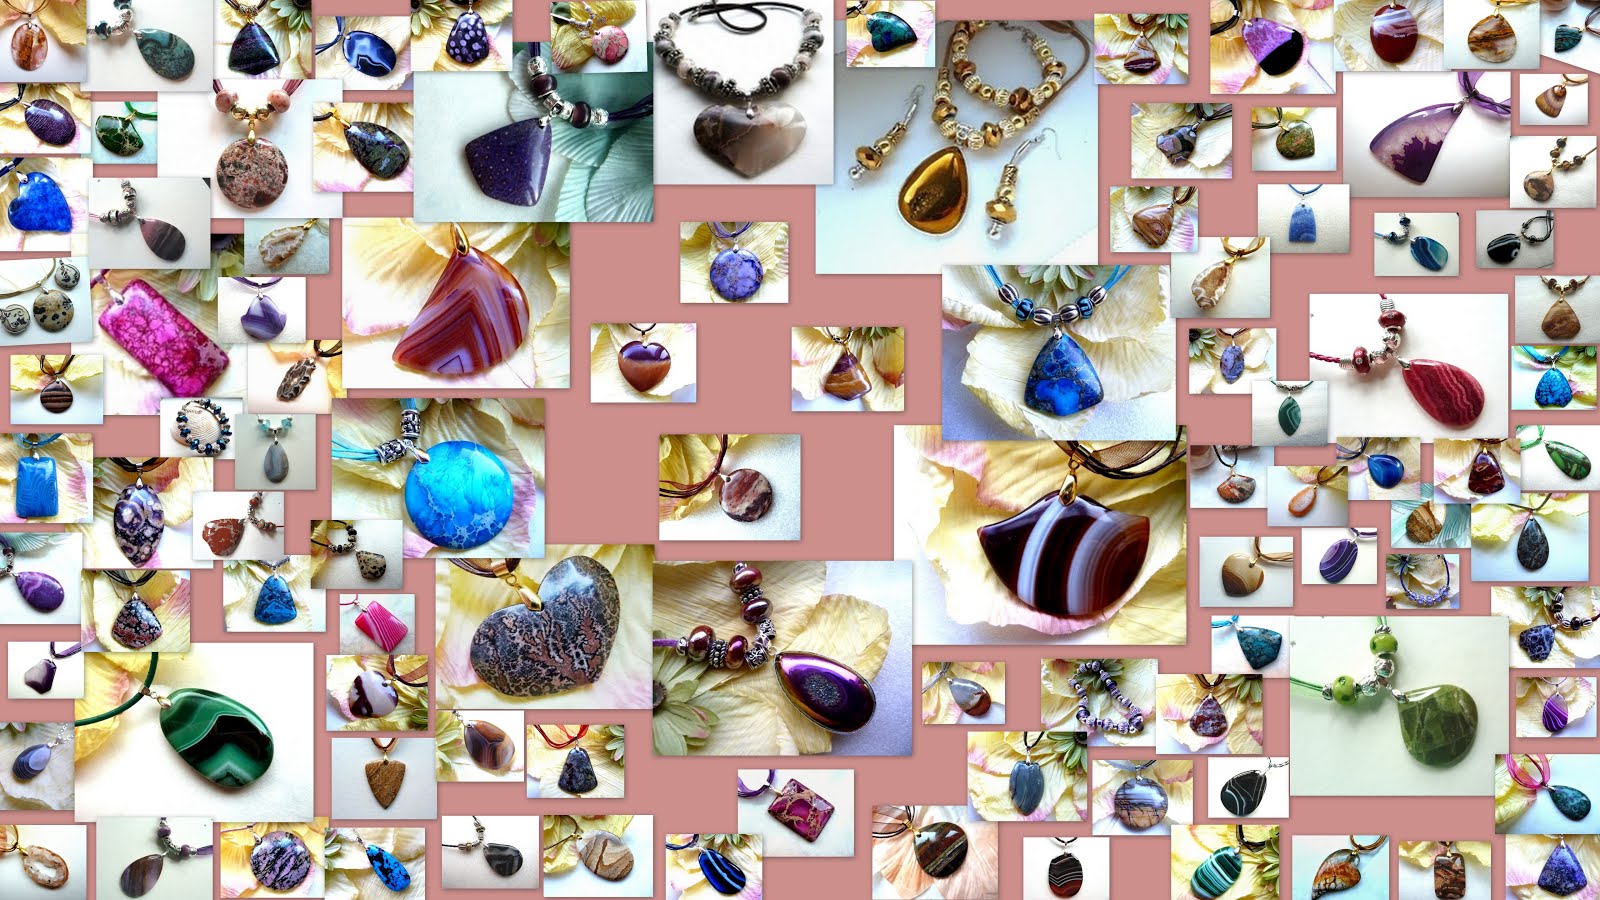 My Google Plus Handmade Jewellery and Cards page